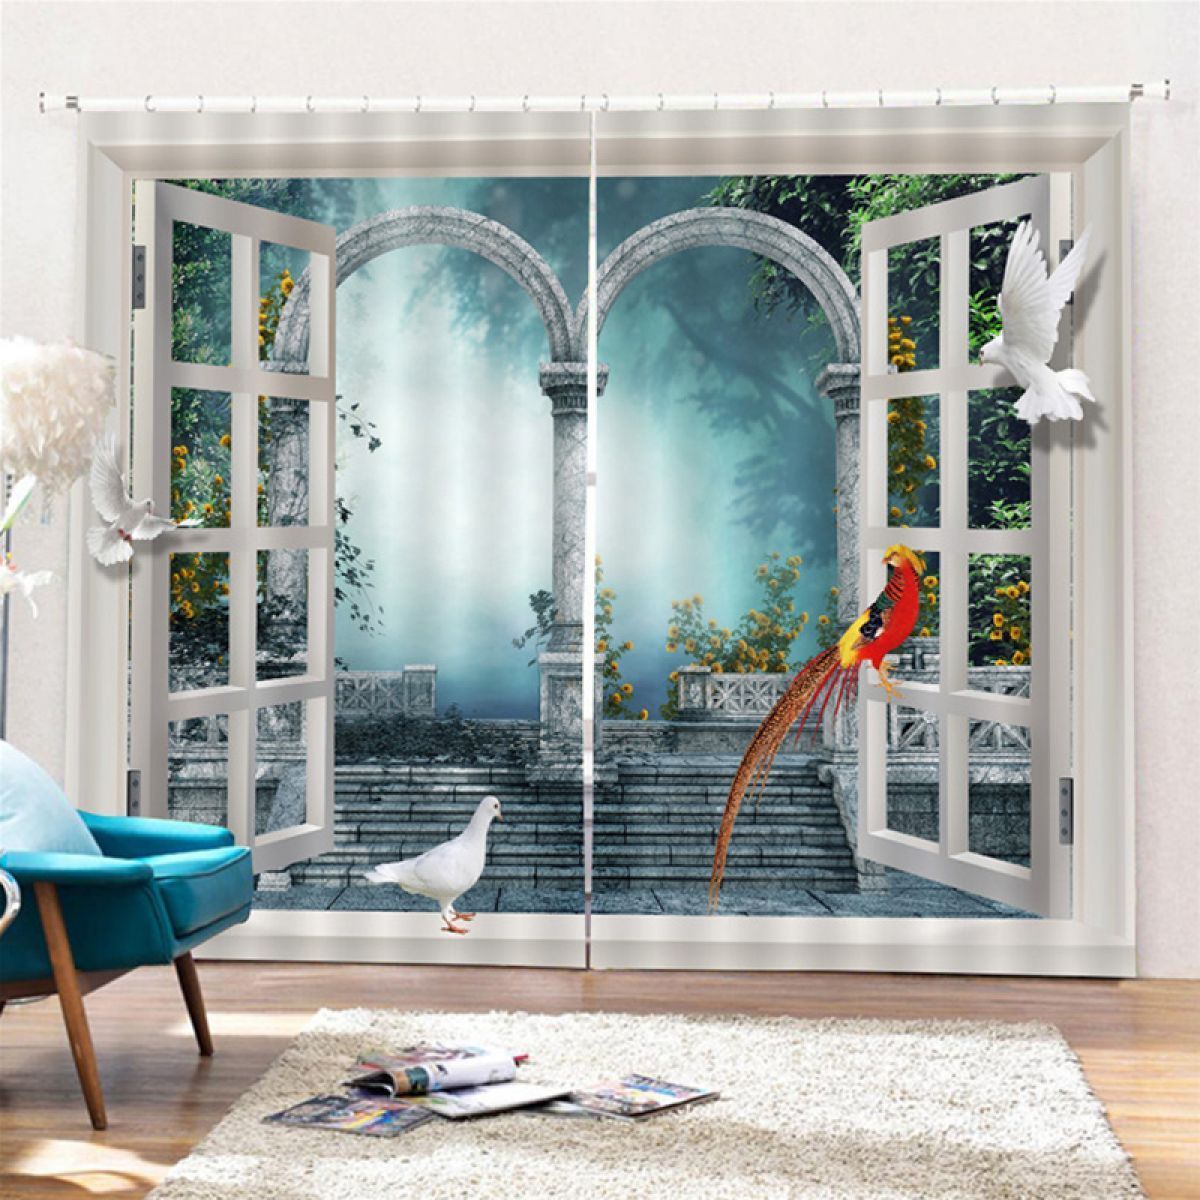 3d window view arch door and foggy forest printed window curtain home decor 3701